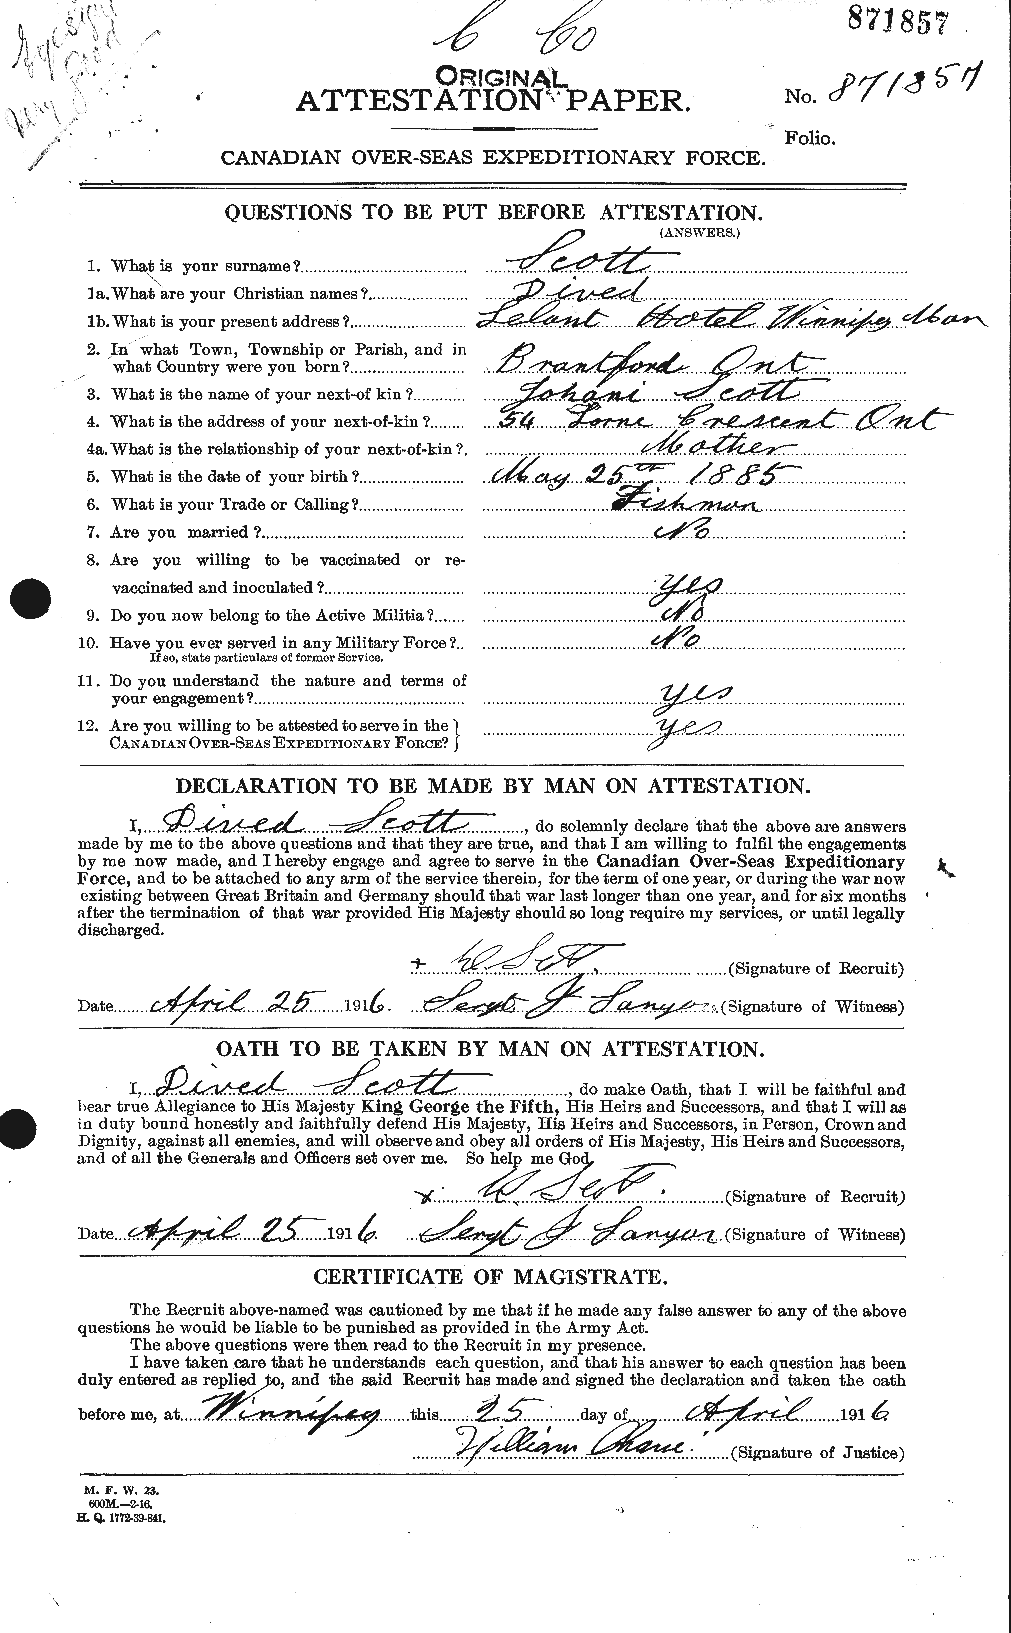 Personnel Records of the First World War - CEF 085366a